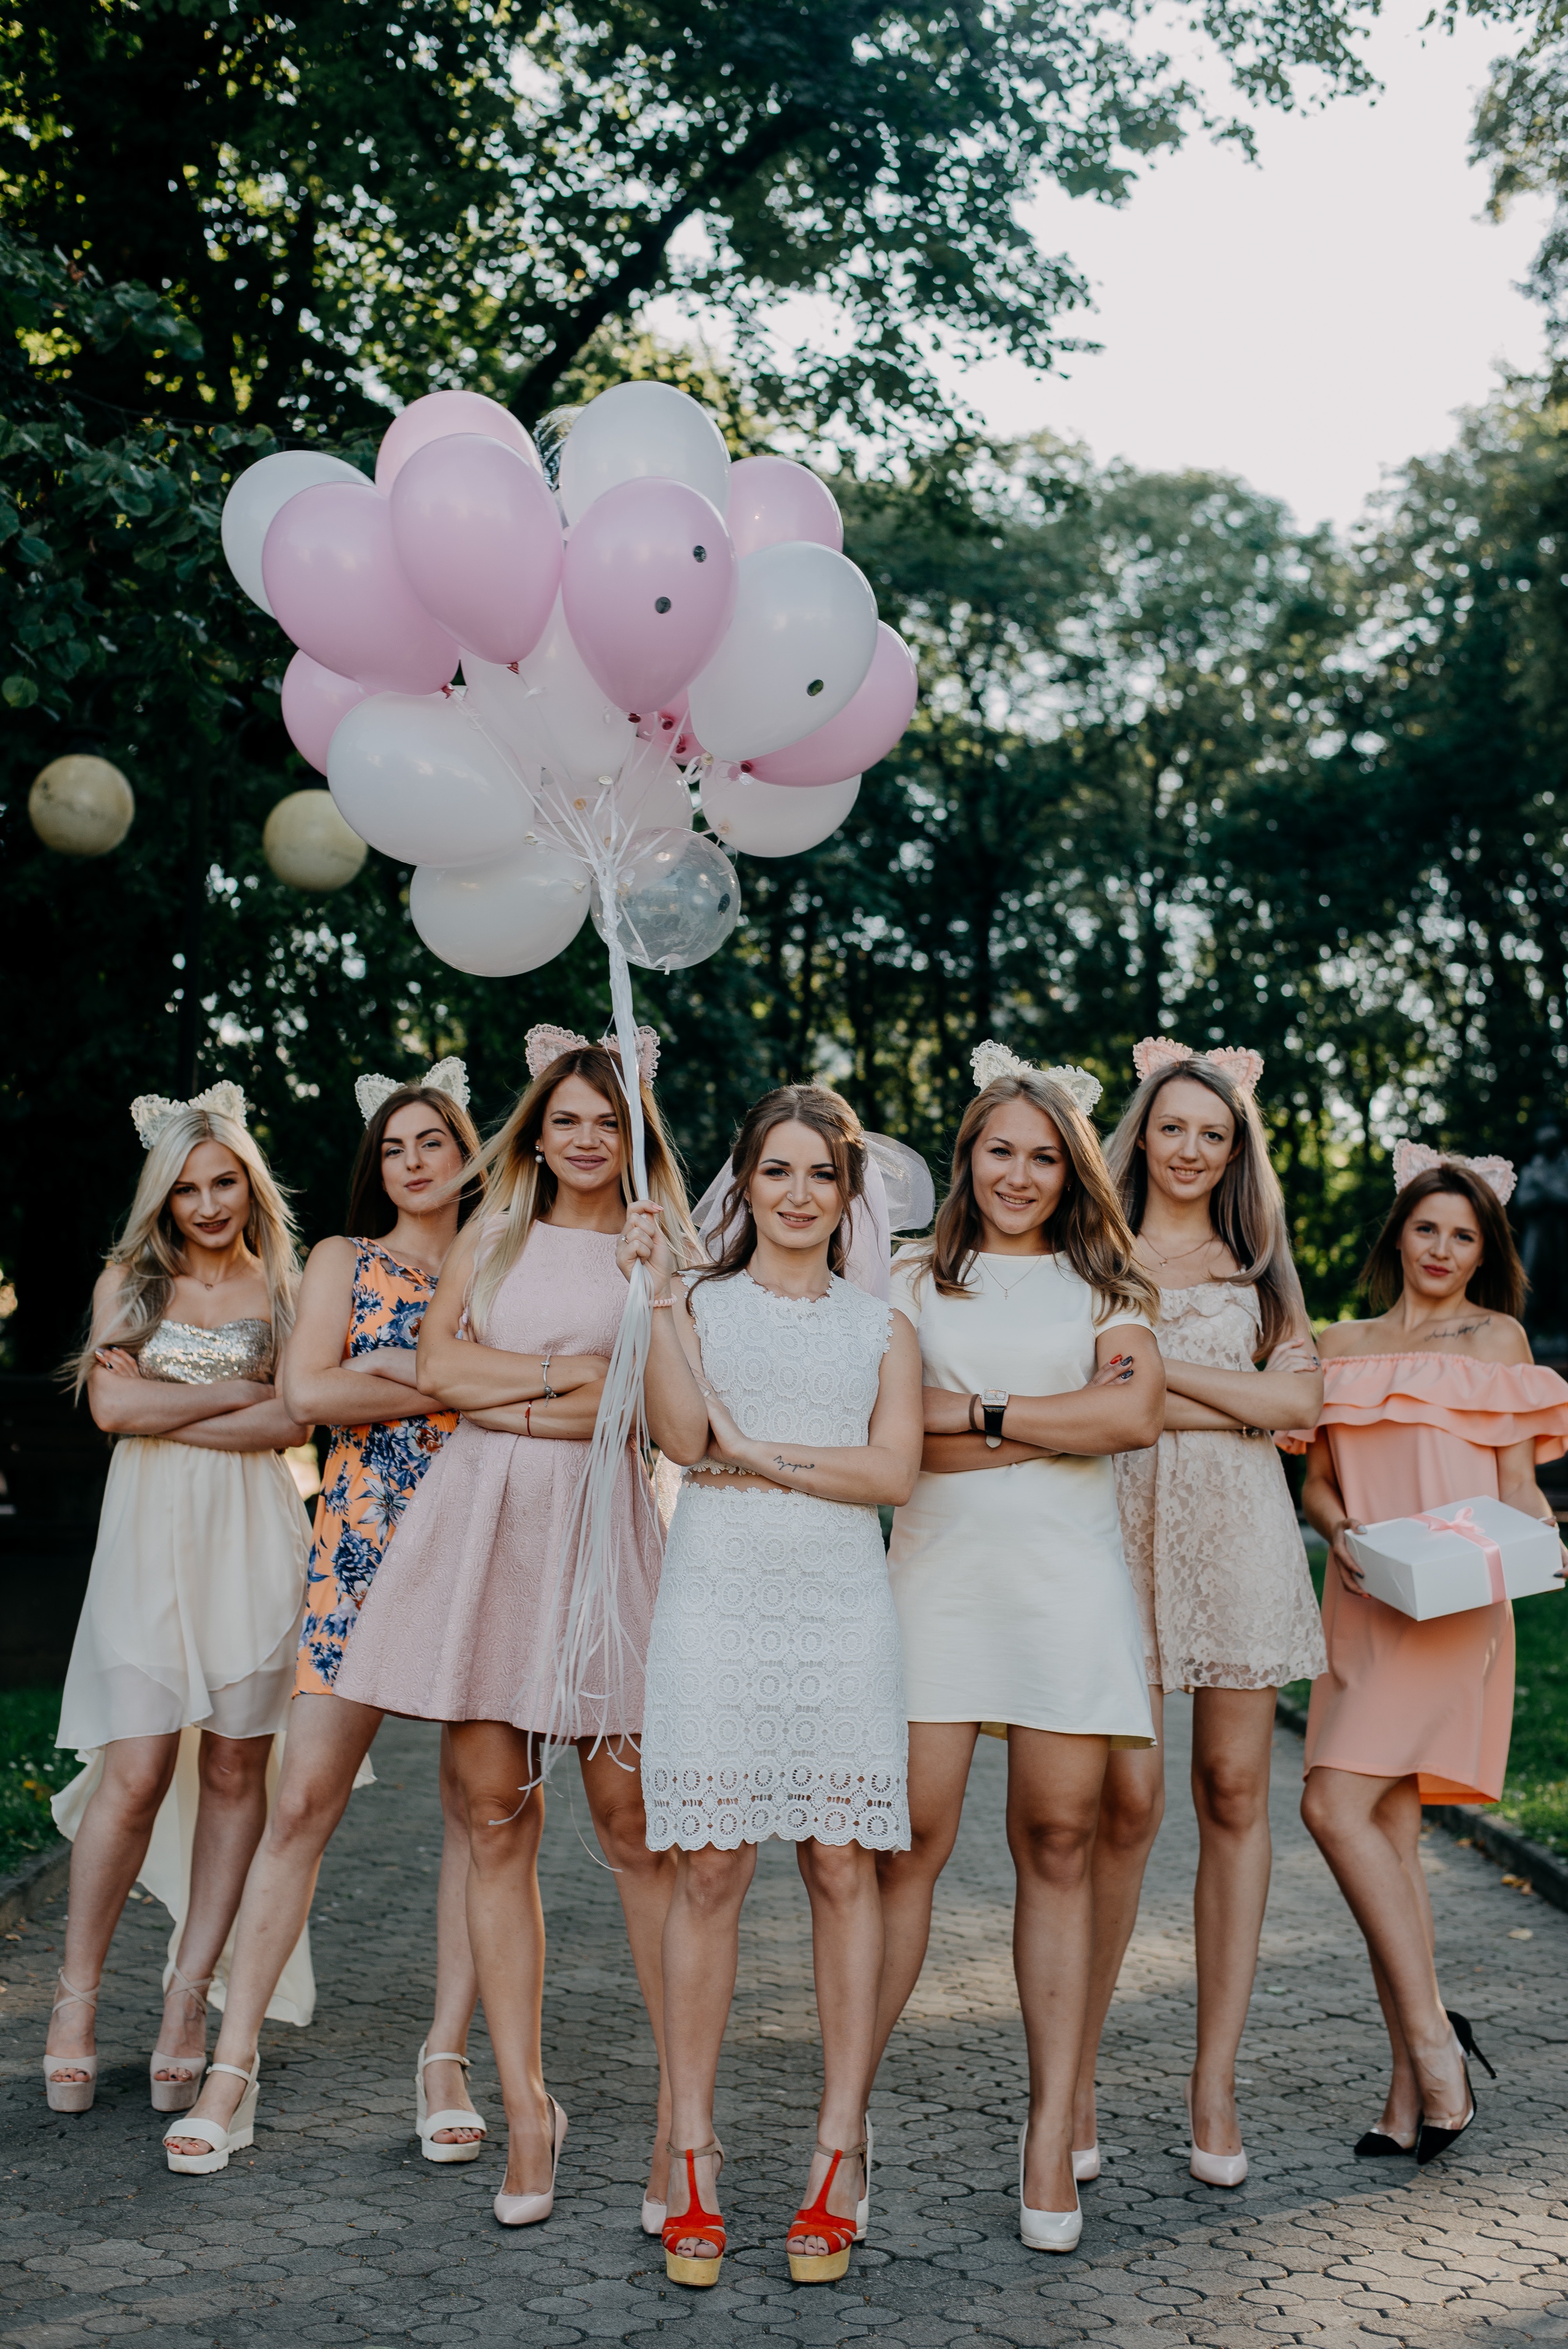 Bachelorette party planning image: A group of excited women wearing matching shirts and sashes, holding colorful cocktails and dancing, surrounded by decorations and balloons.